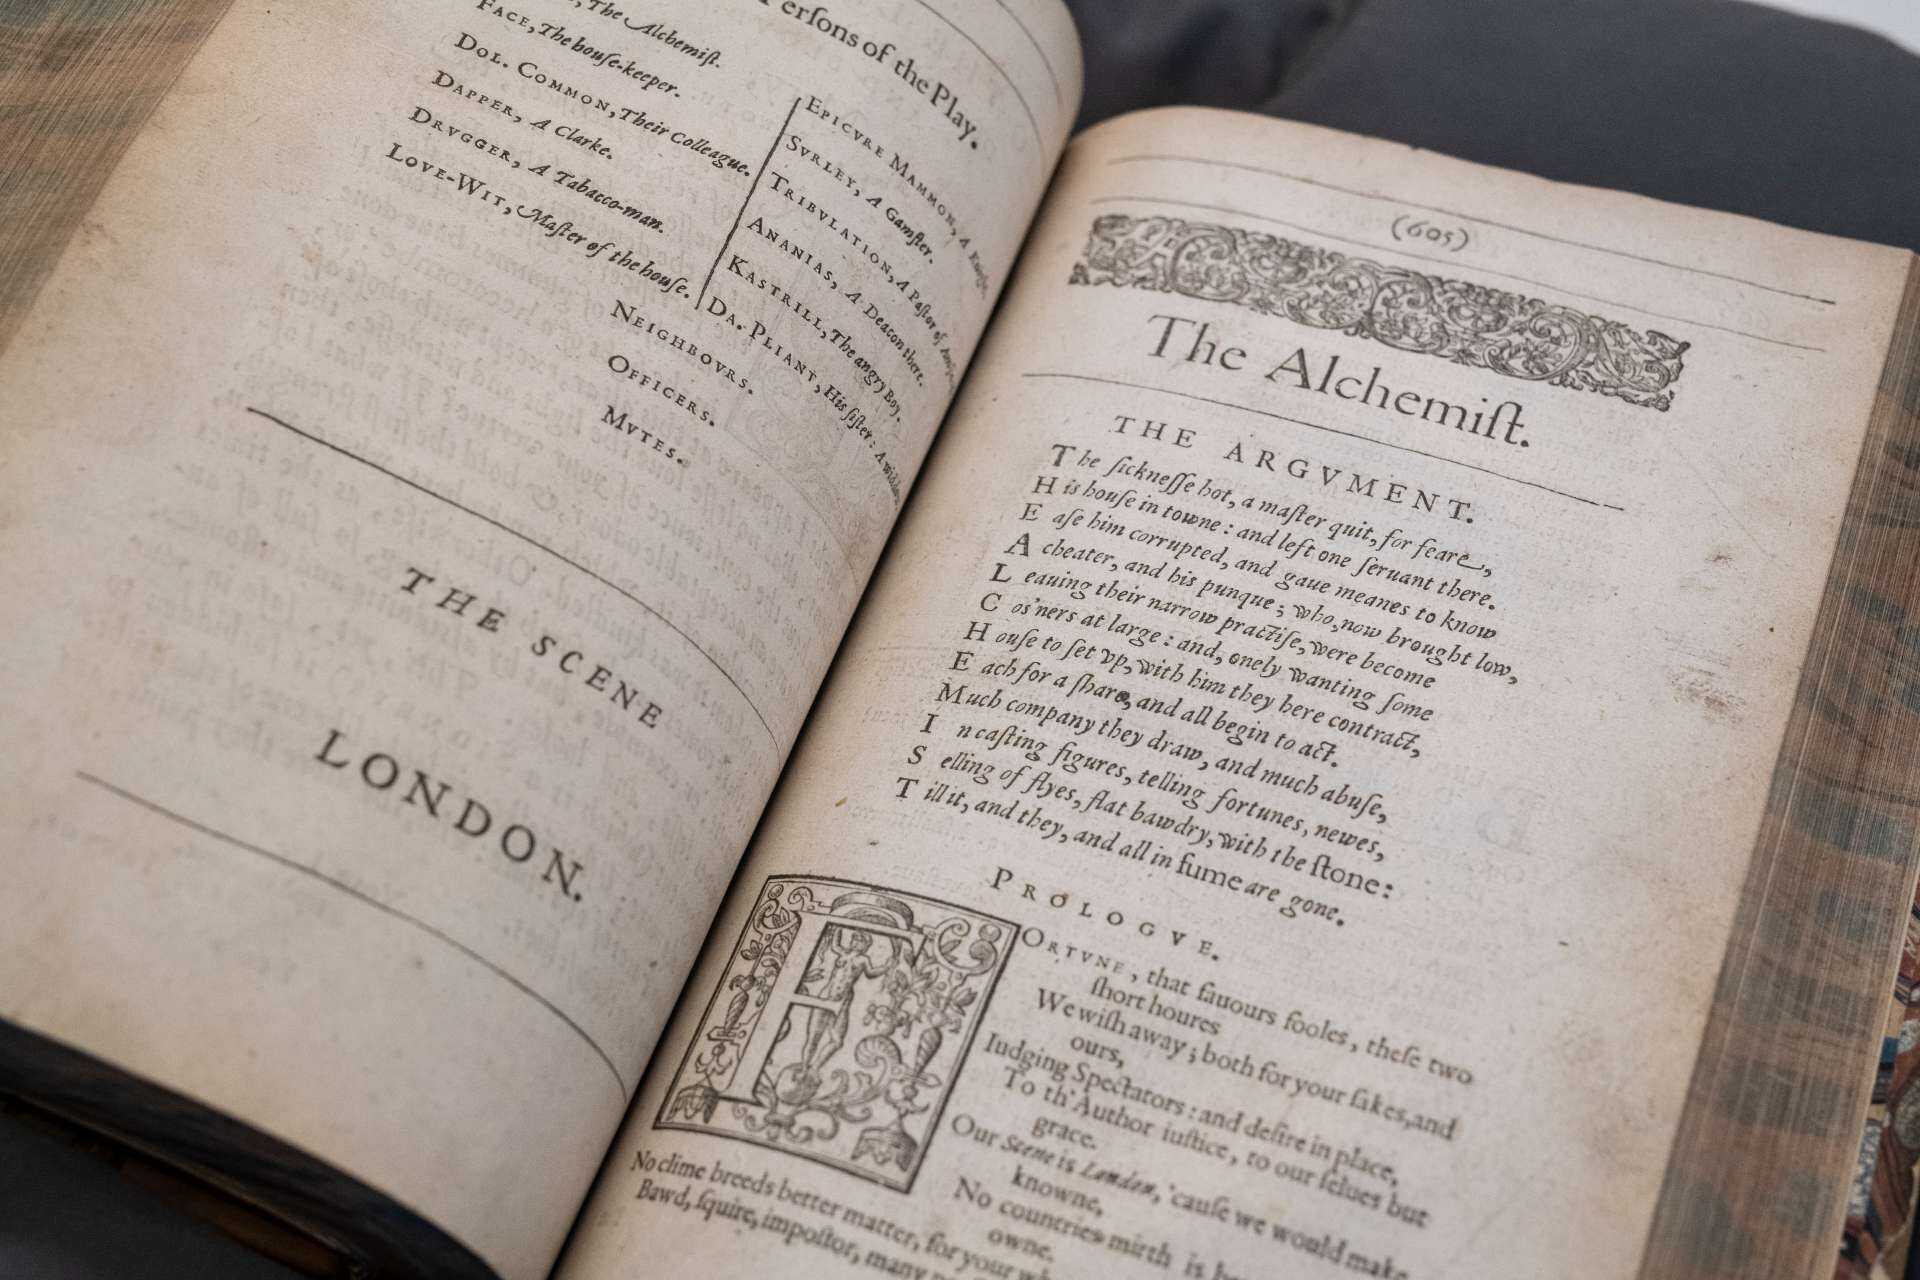 Close-up of the first page of Ben Jonson's The Alchemist